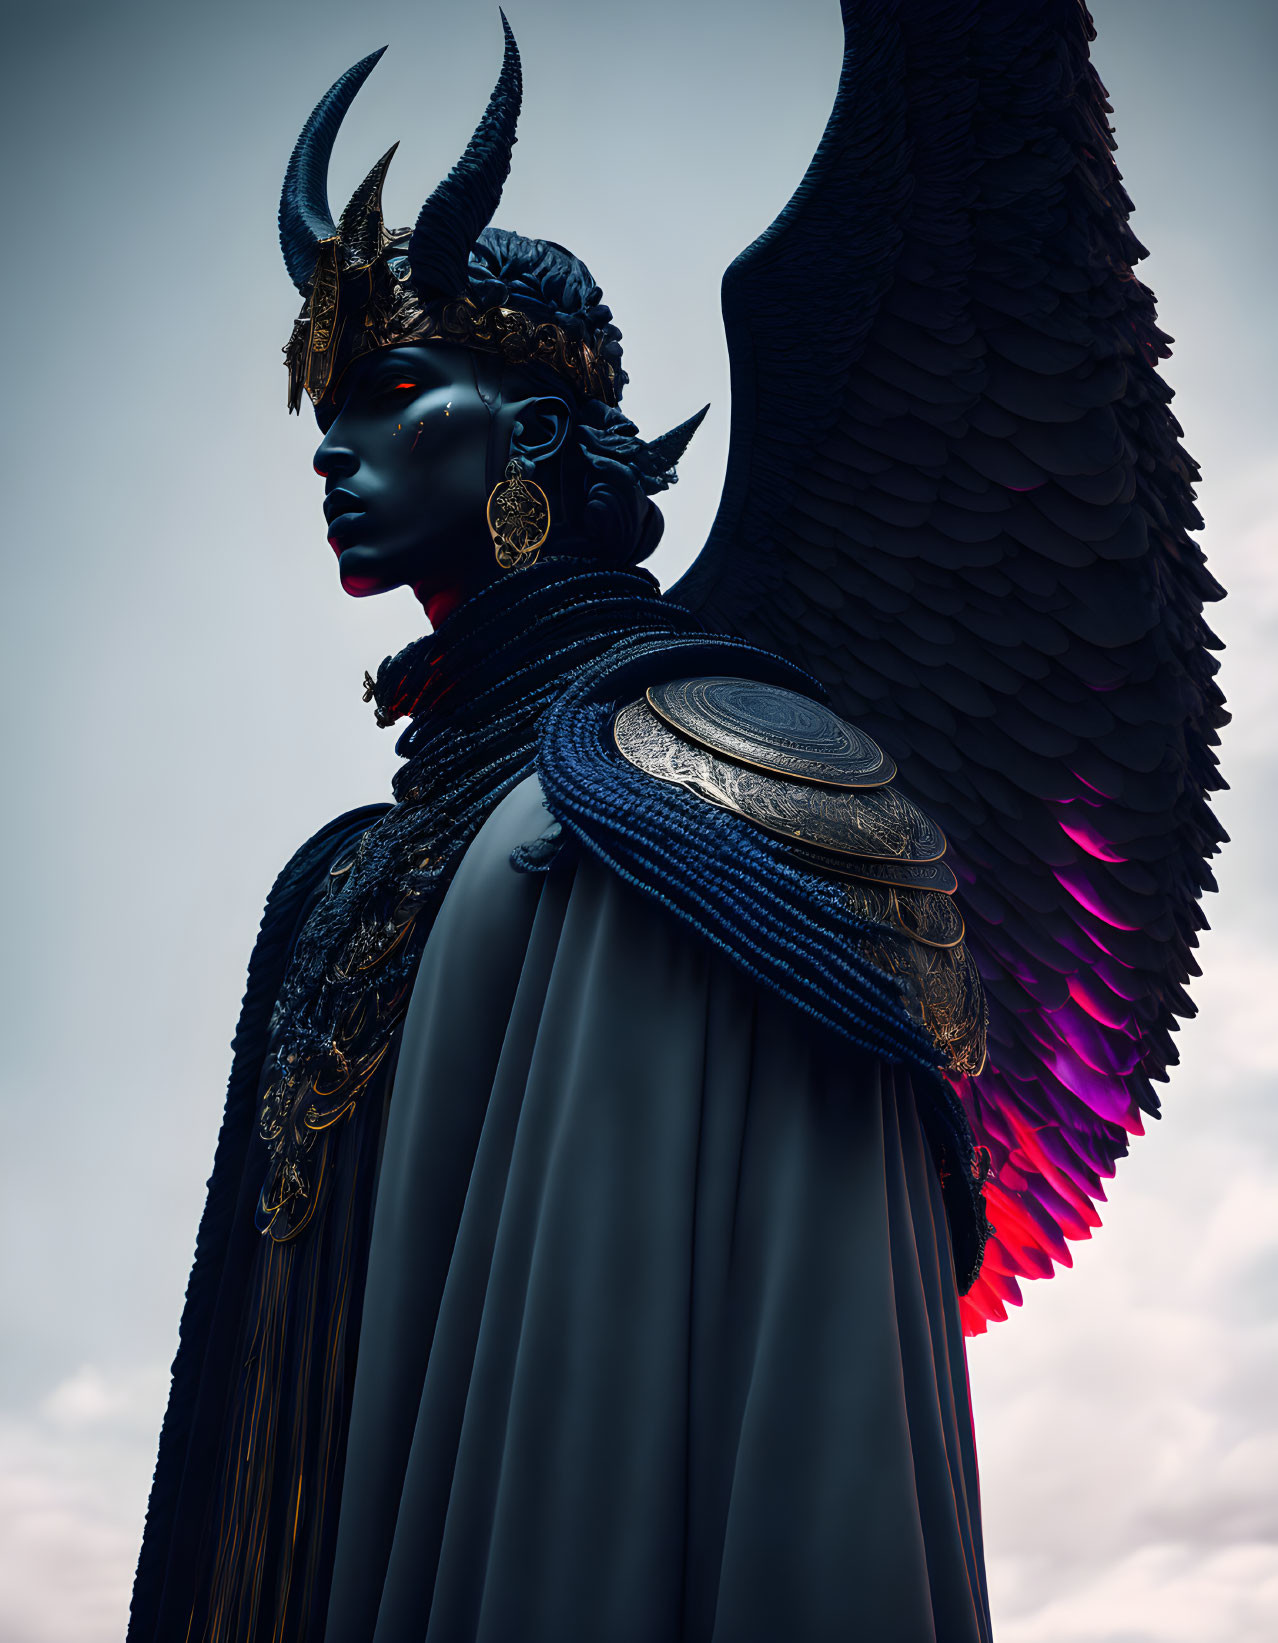 Blue-skinned figure with horns and wings in gold jewelry under cloudy sky